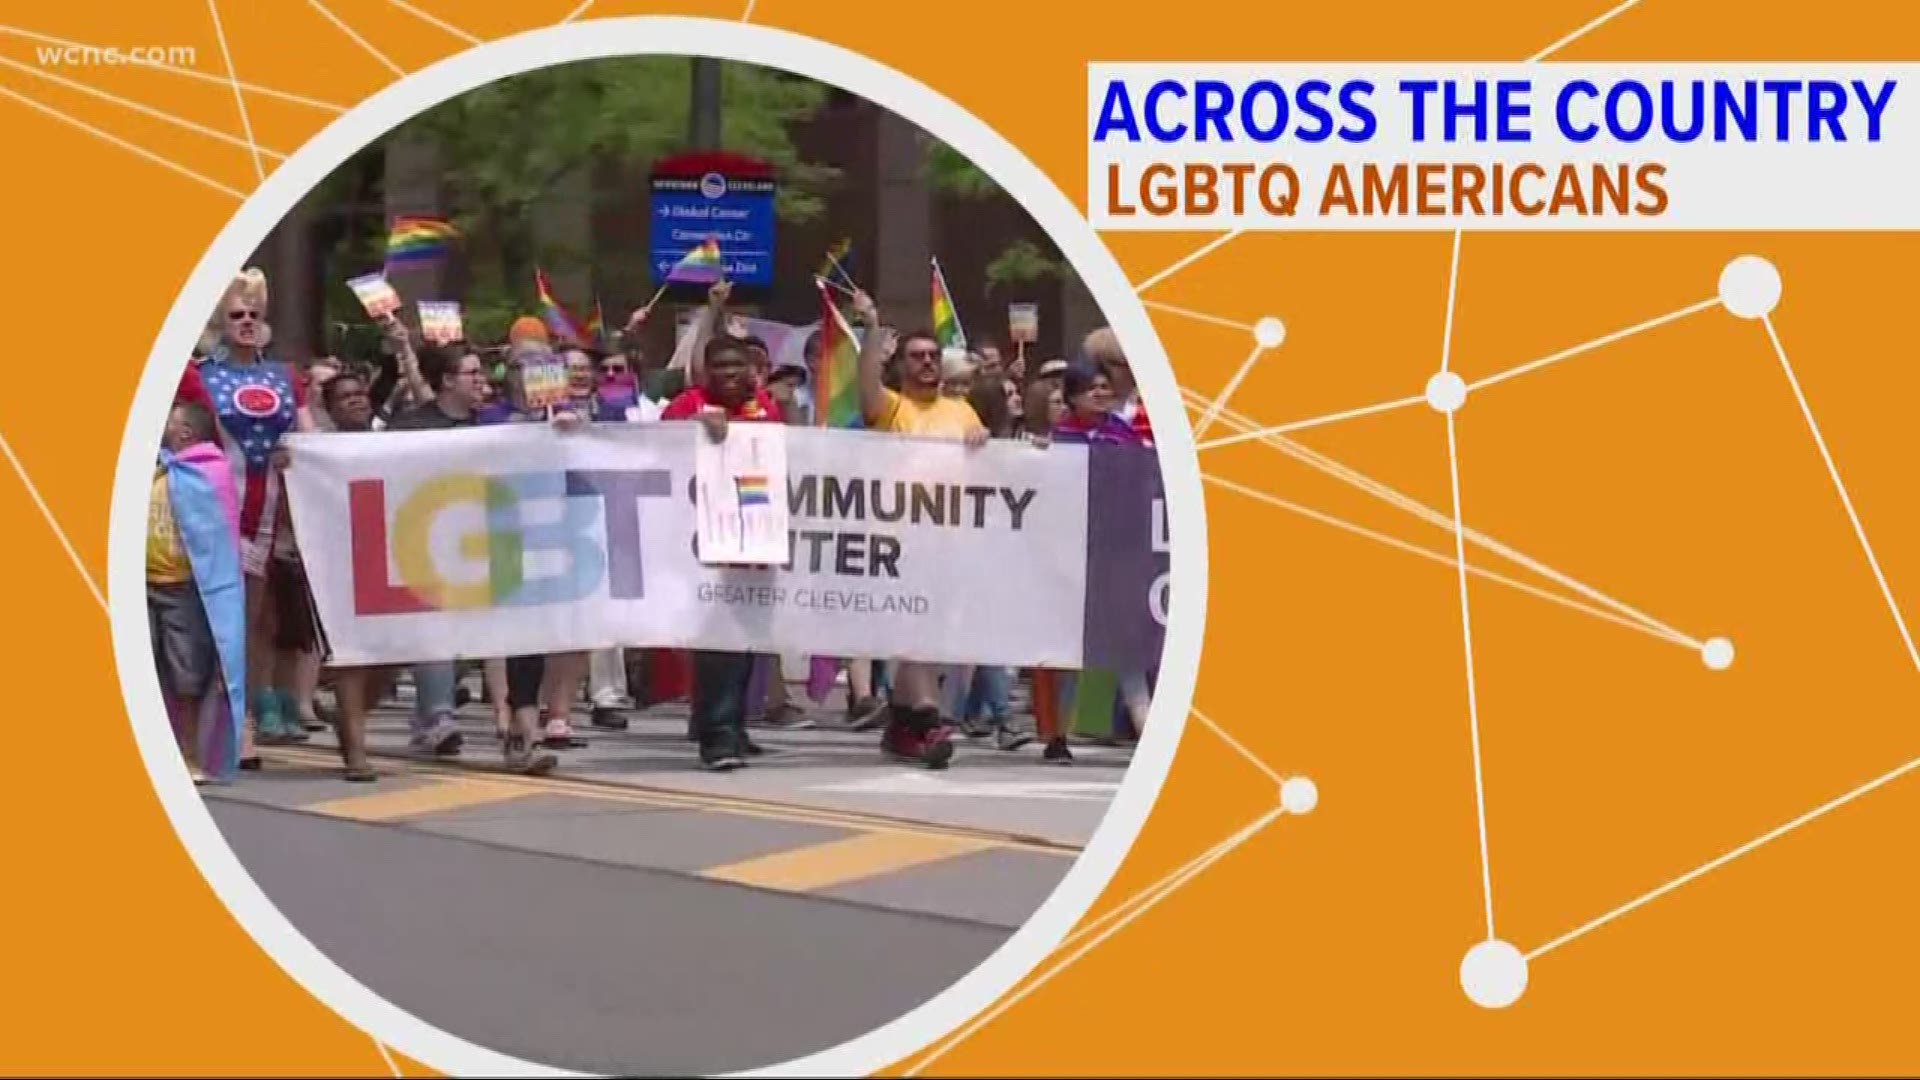 June is Pride Month for LGBTQ citizens across America. Despite the parades and festivals, activists say pride is about more than just parties, it's a fight for equality.